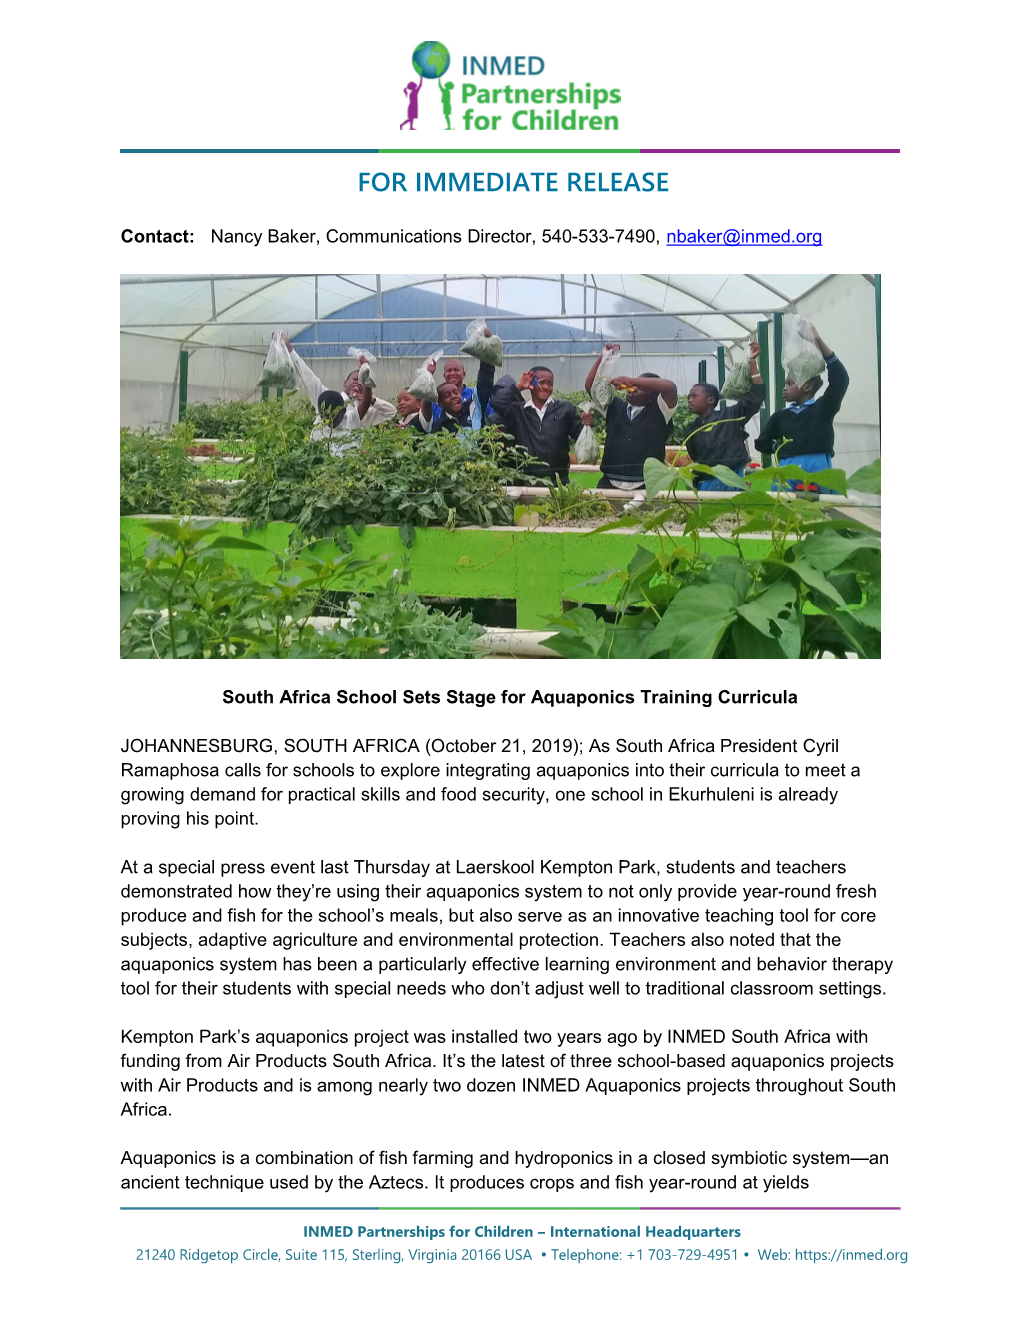 South Africa School Sets Stage for Aquaponics Training Curricula